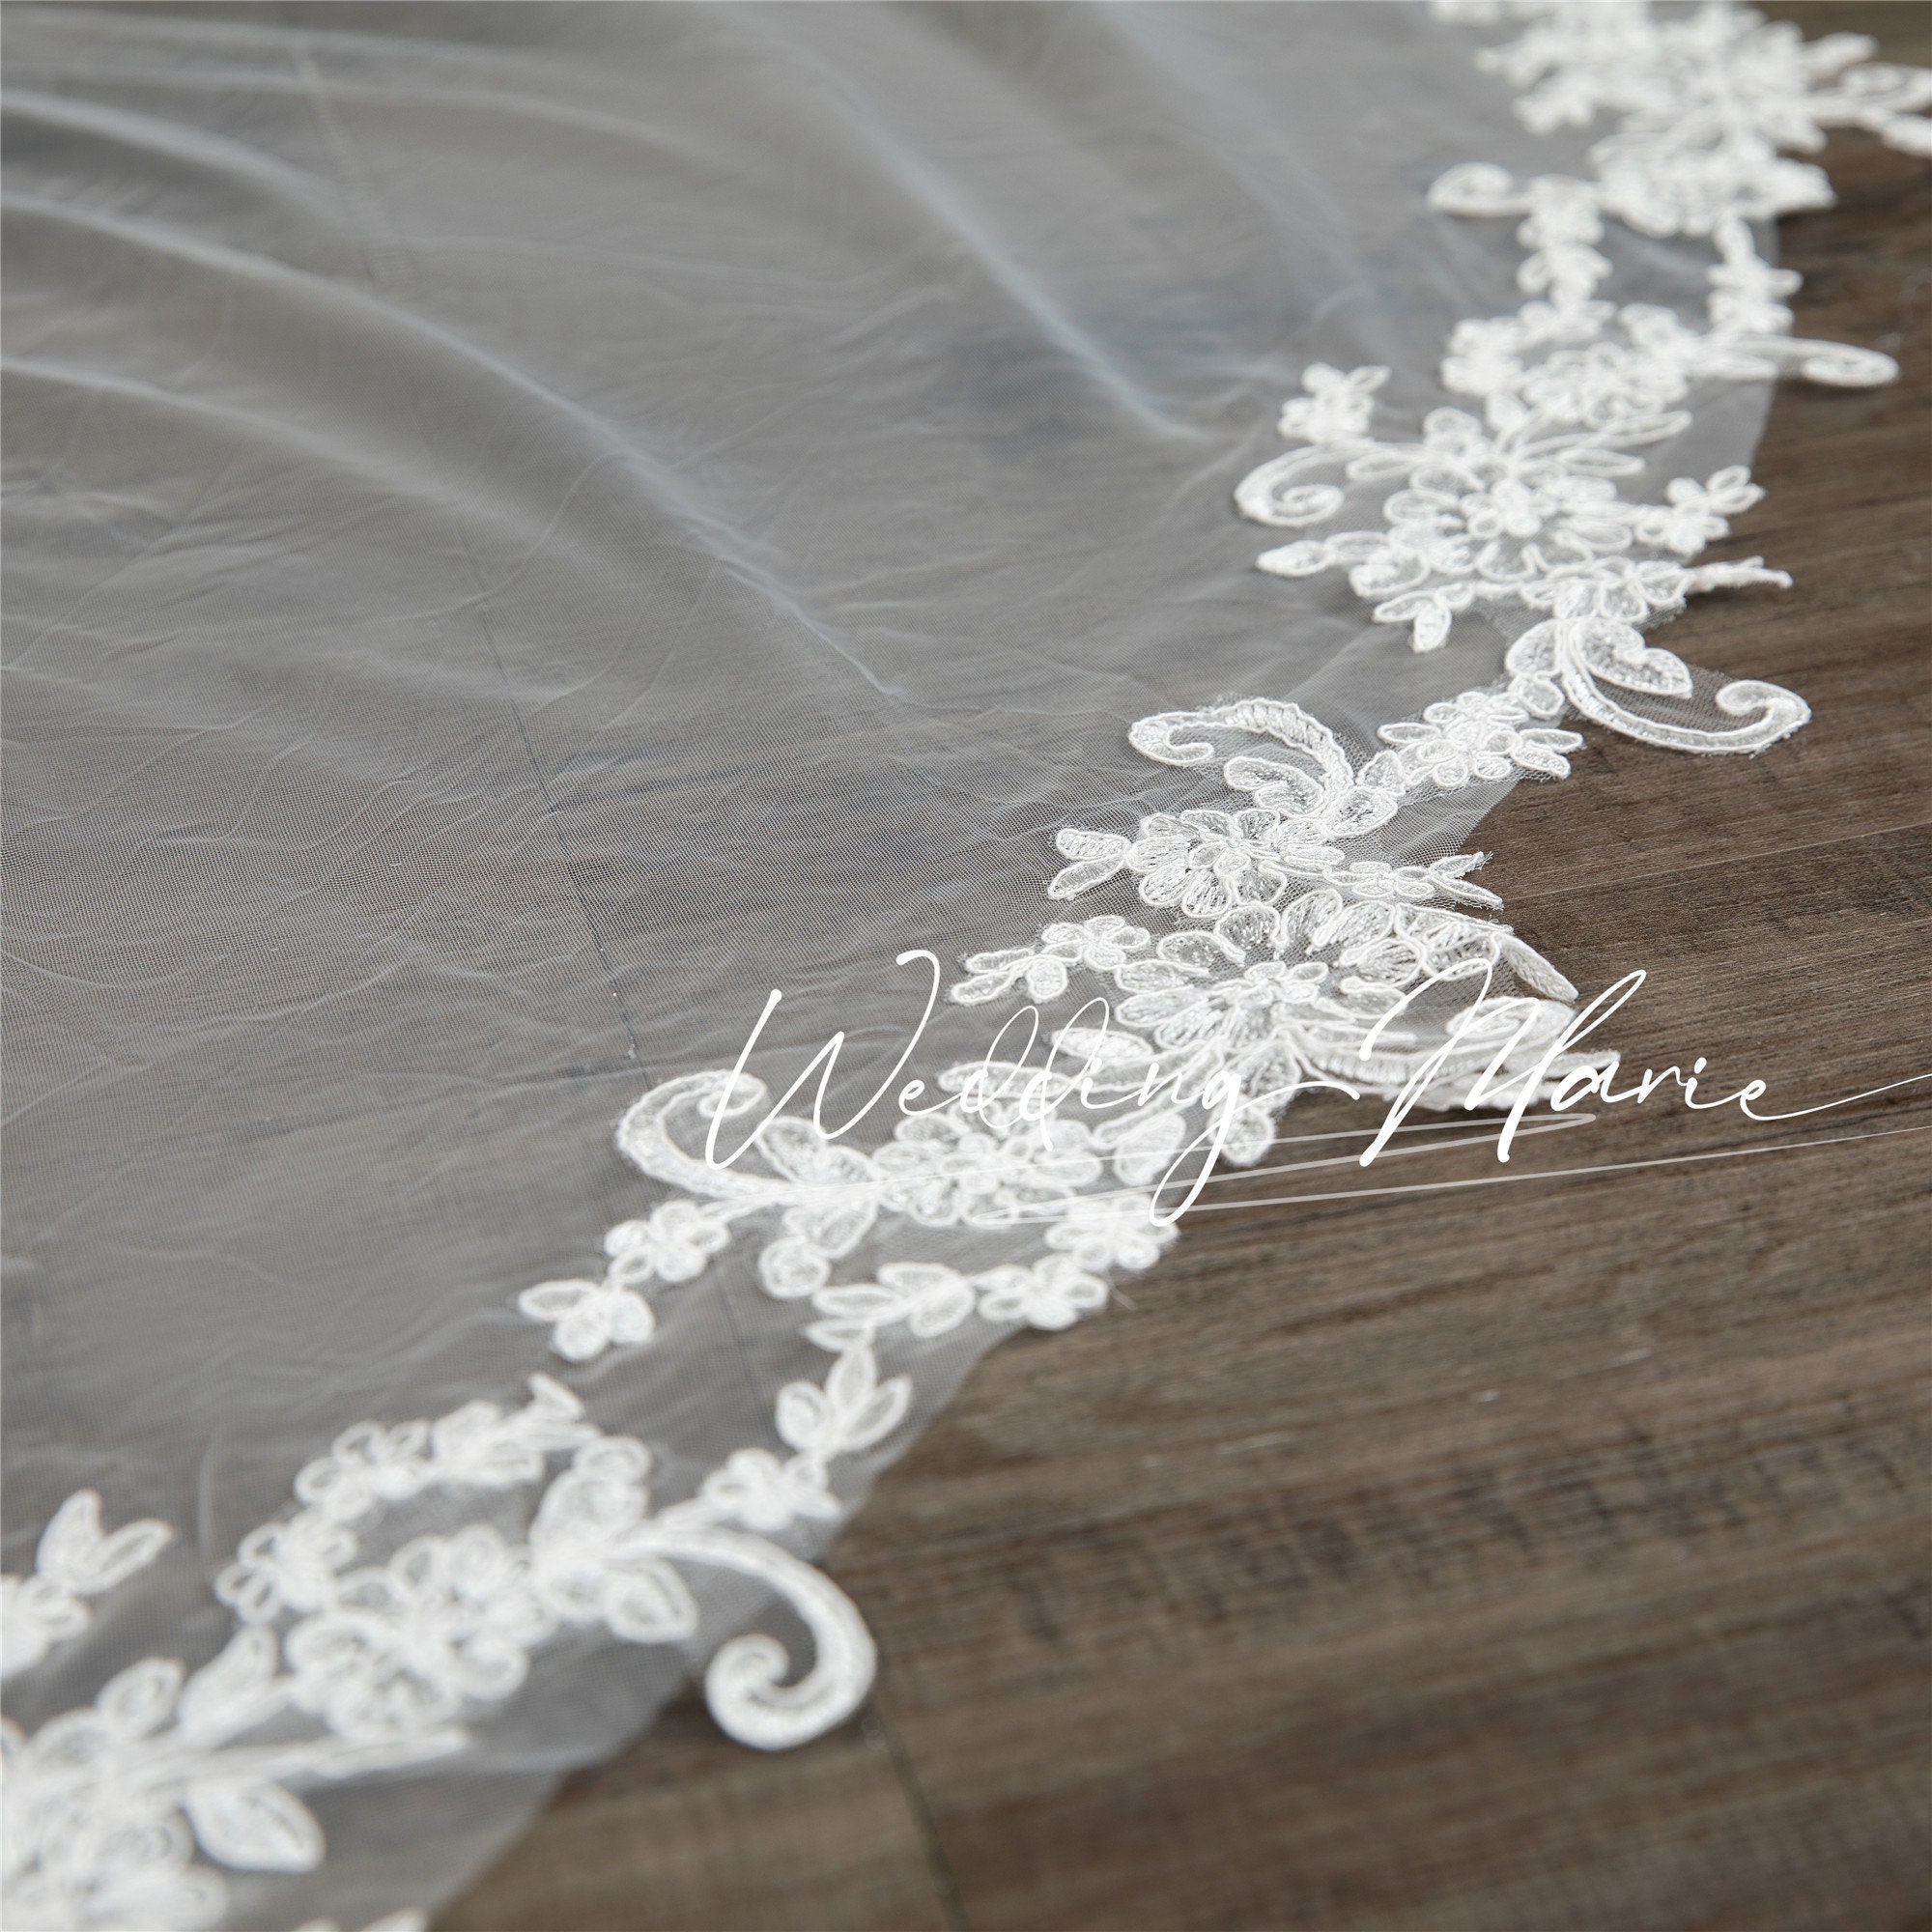 One Layer Tulle with Lace Edge Long Wedding Veils with Comb –  BestWeddingVeil